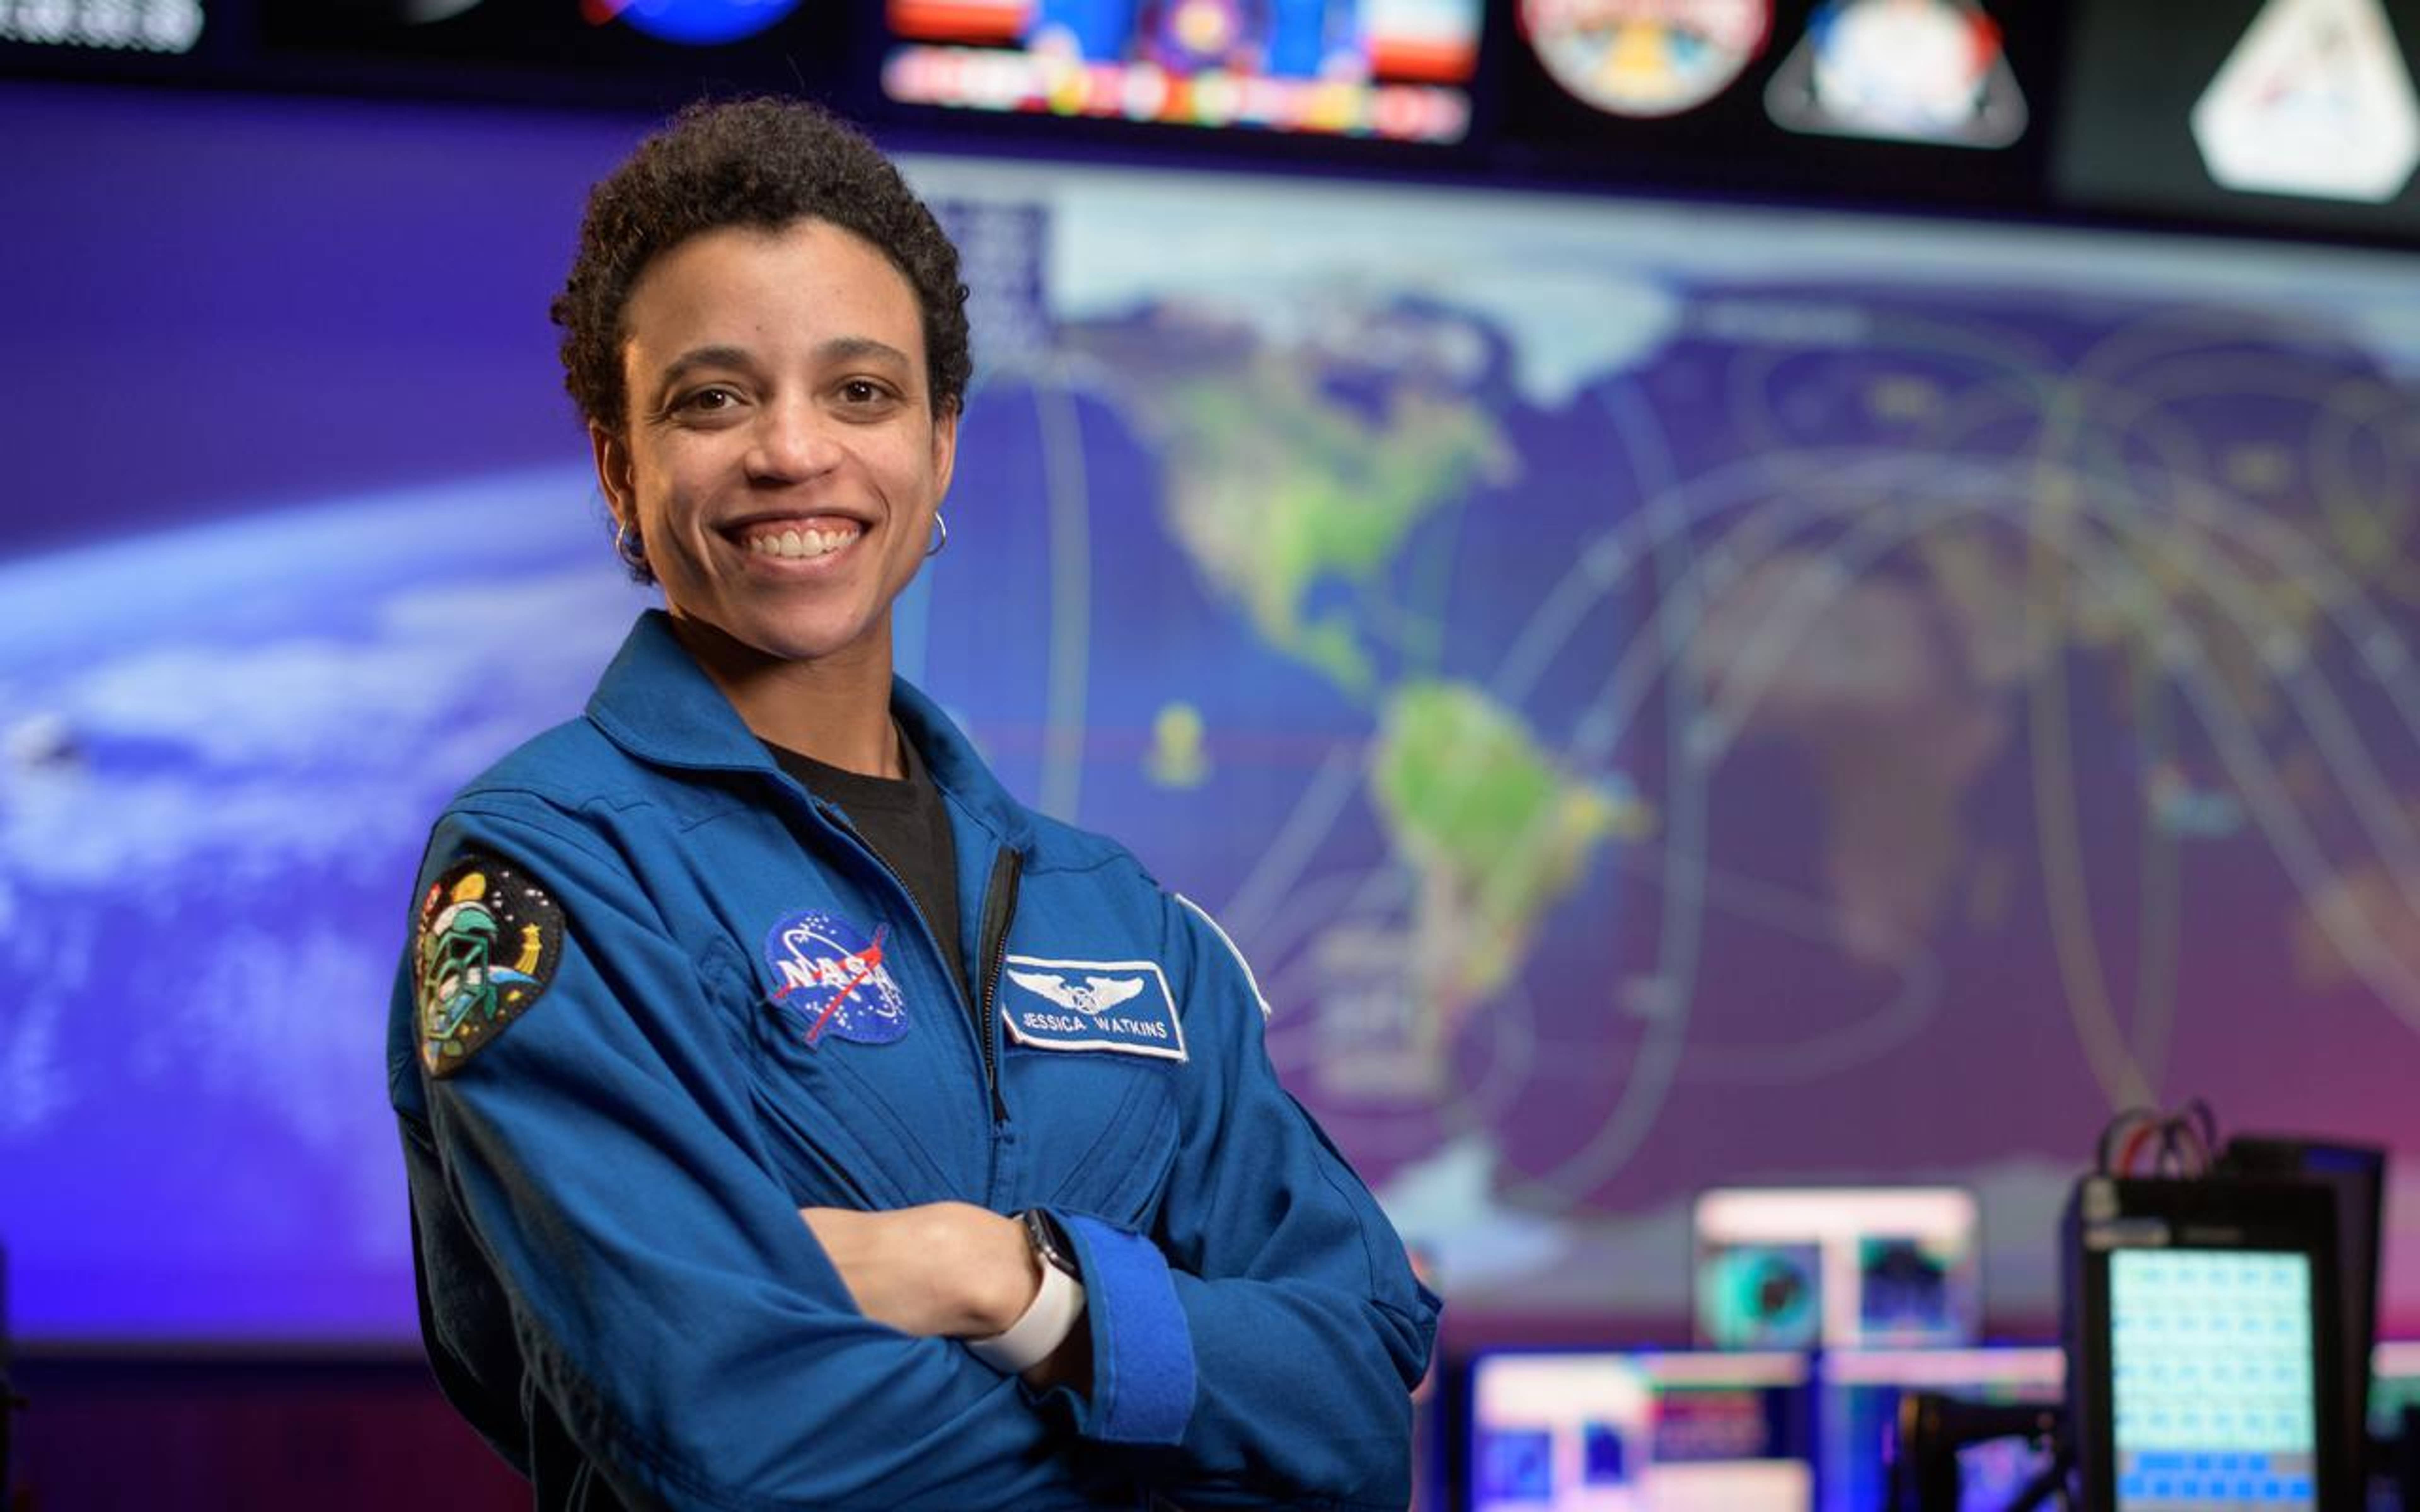 Jessica Watkins Set To Become First Black Woman To Join International Space Station Crew As NASA Names Her For SpaceX Crew-4 Mission